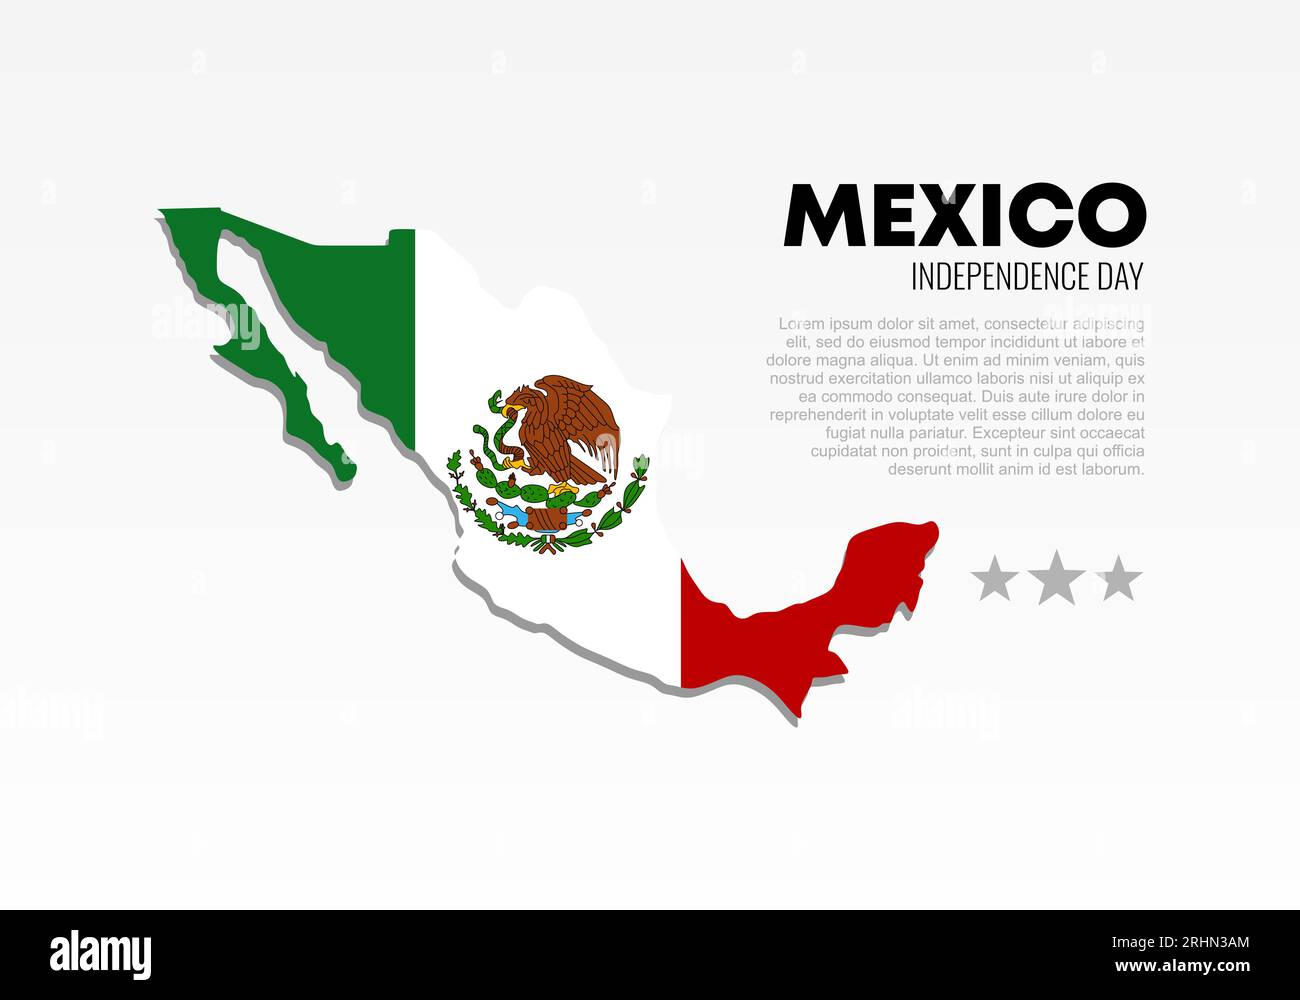 Mexico independence day background banner poster for national celebration on 16 and 17 september. Stock Vector